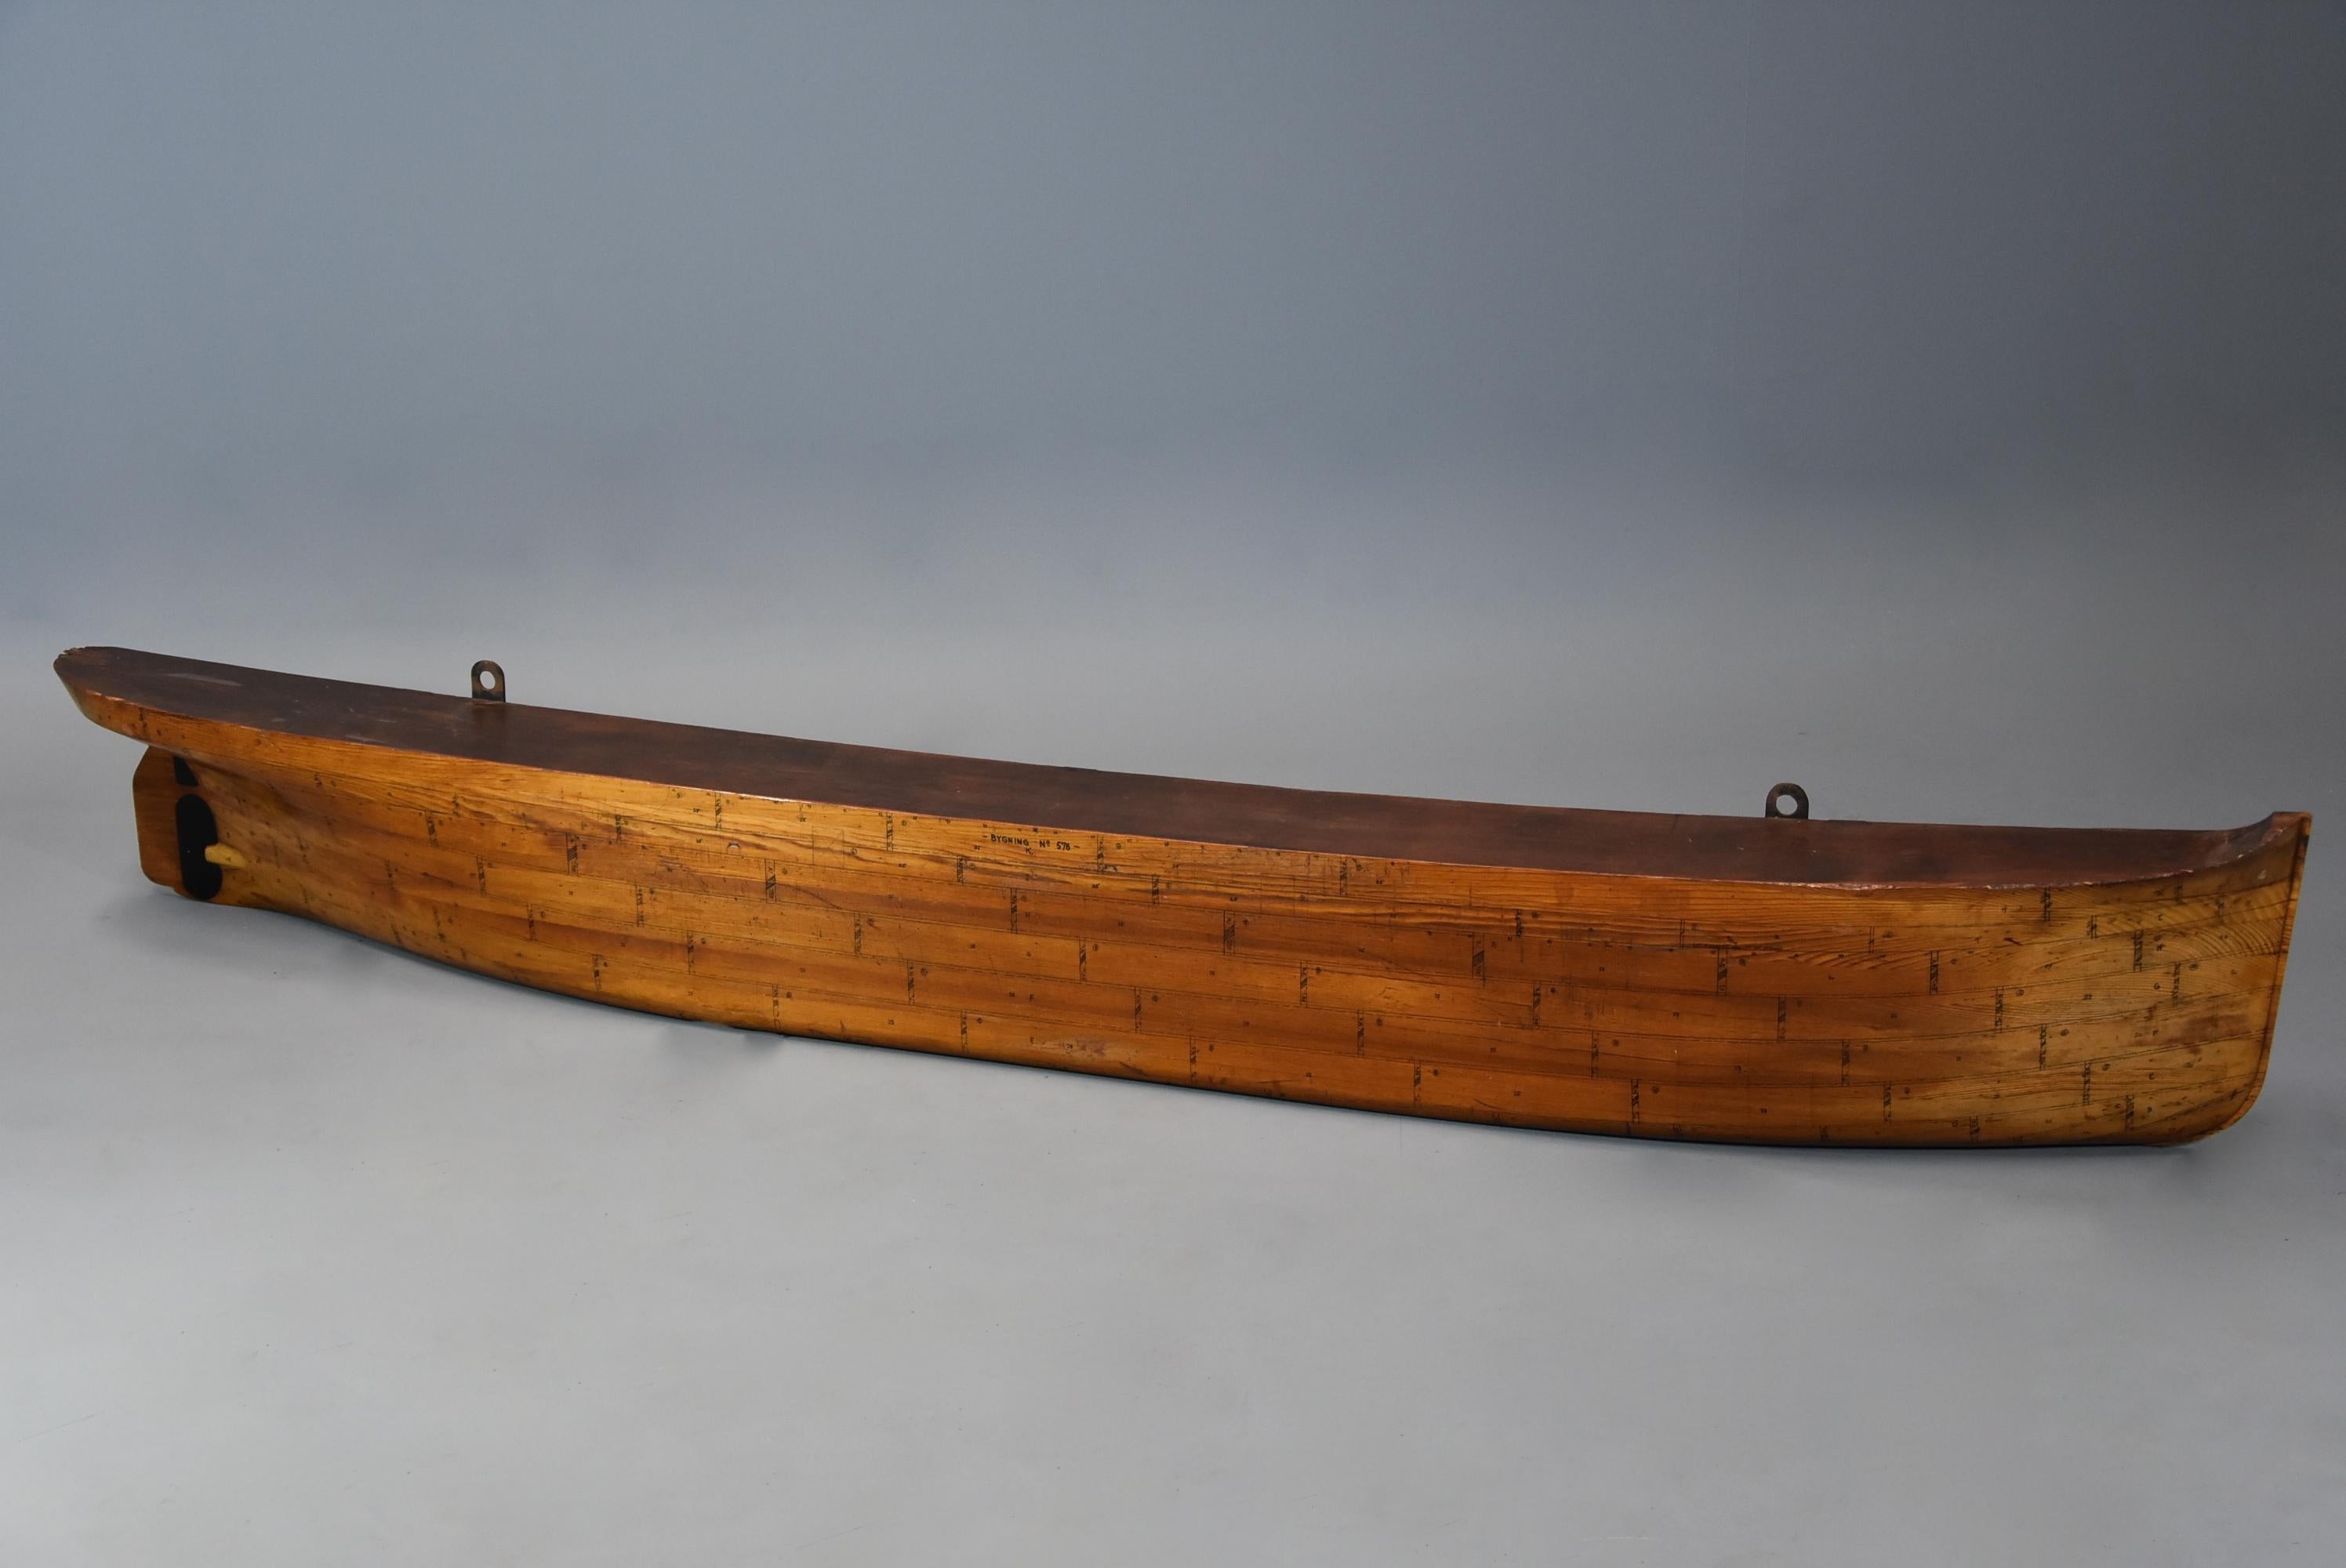 A large & highly decorative example of a late 19th century pine shipwright's half hull model of a steamboat or paddle steamer, possibly Scandinavian, 'BYGNING No: 578' translating to 'Building No: 578'.

This piece is in very good condition for